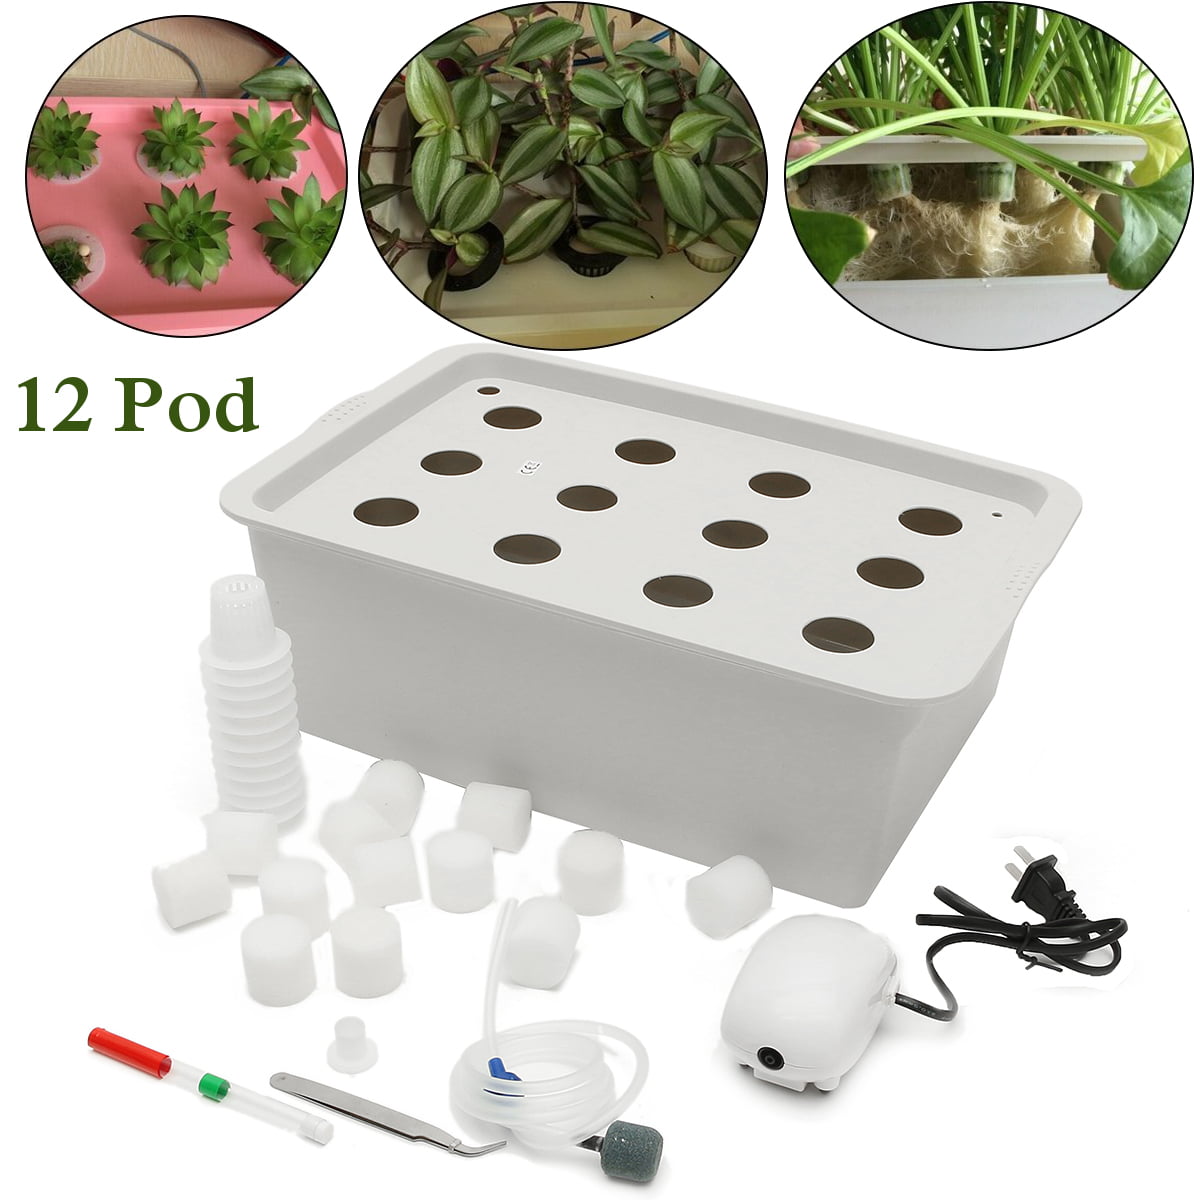 Plant Site Deep Water Culture Hydroponic System Bubble Tub Air Pump Grow Kit 